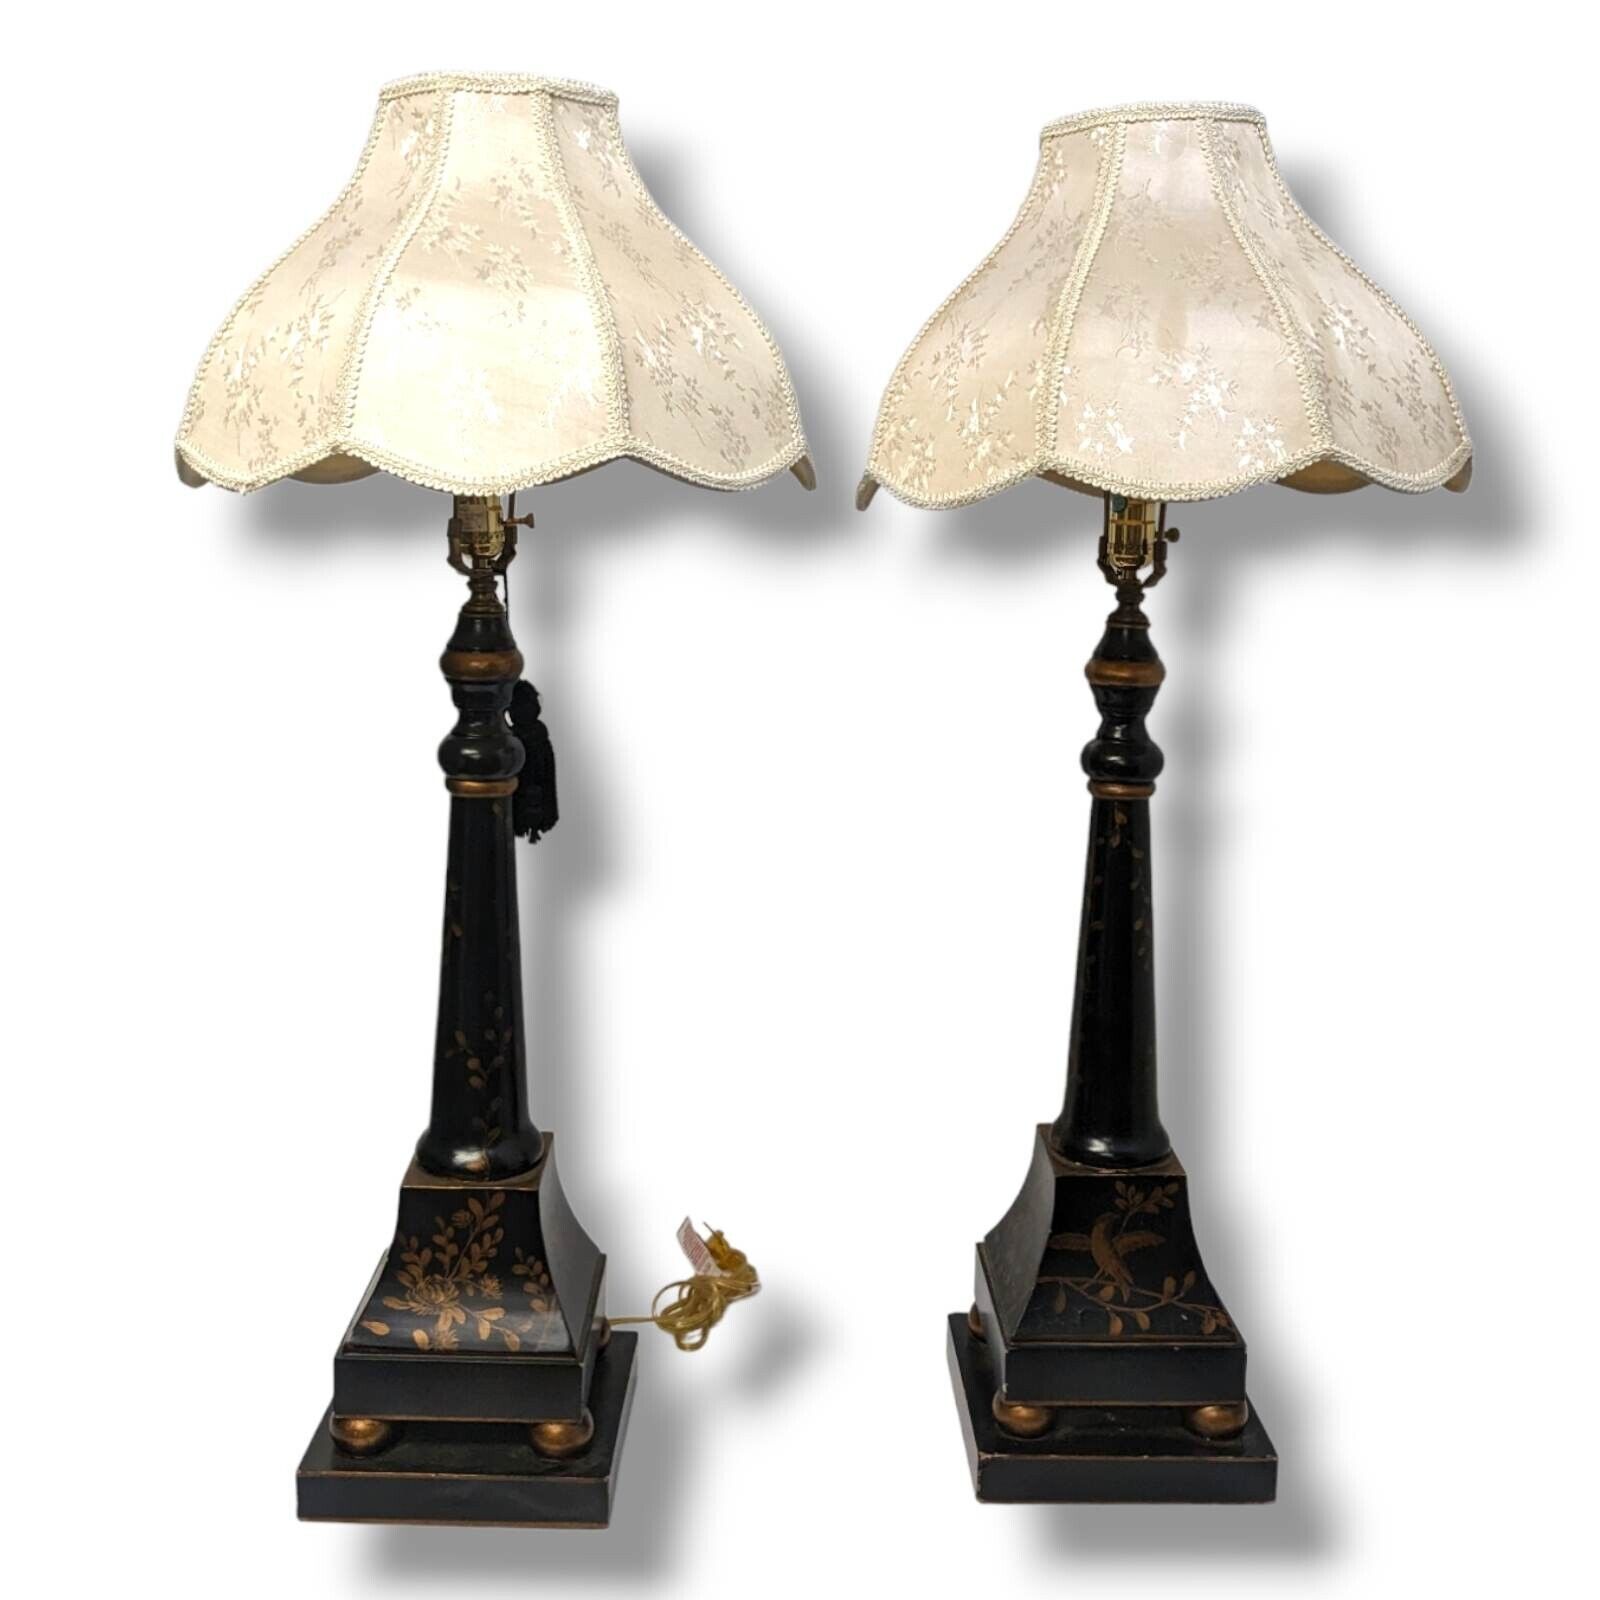 Pair Of Wooden Neoclassical Empire Lamps With Antique Shades Queen Anne Style